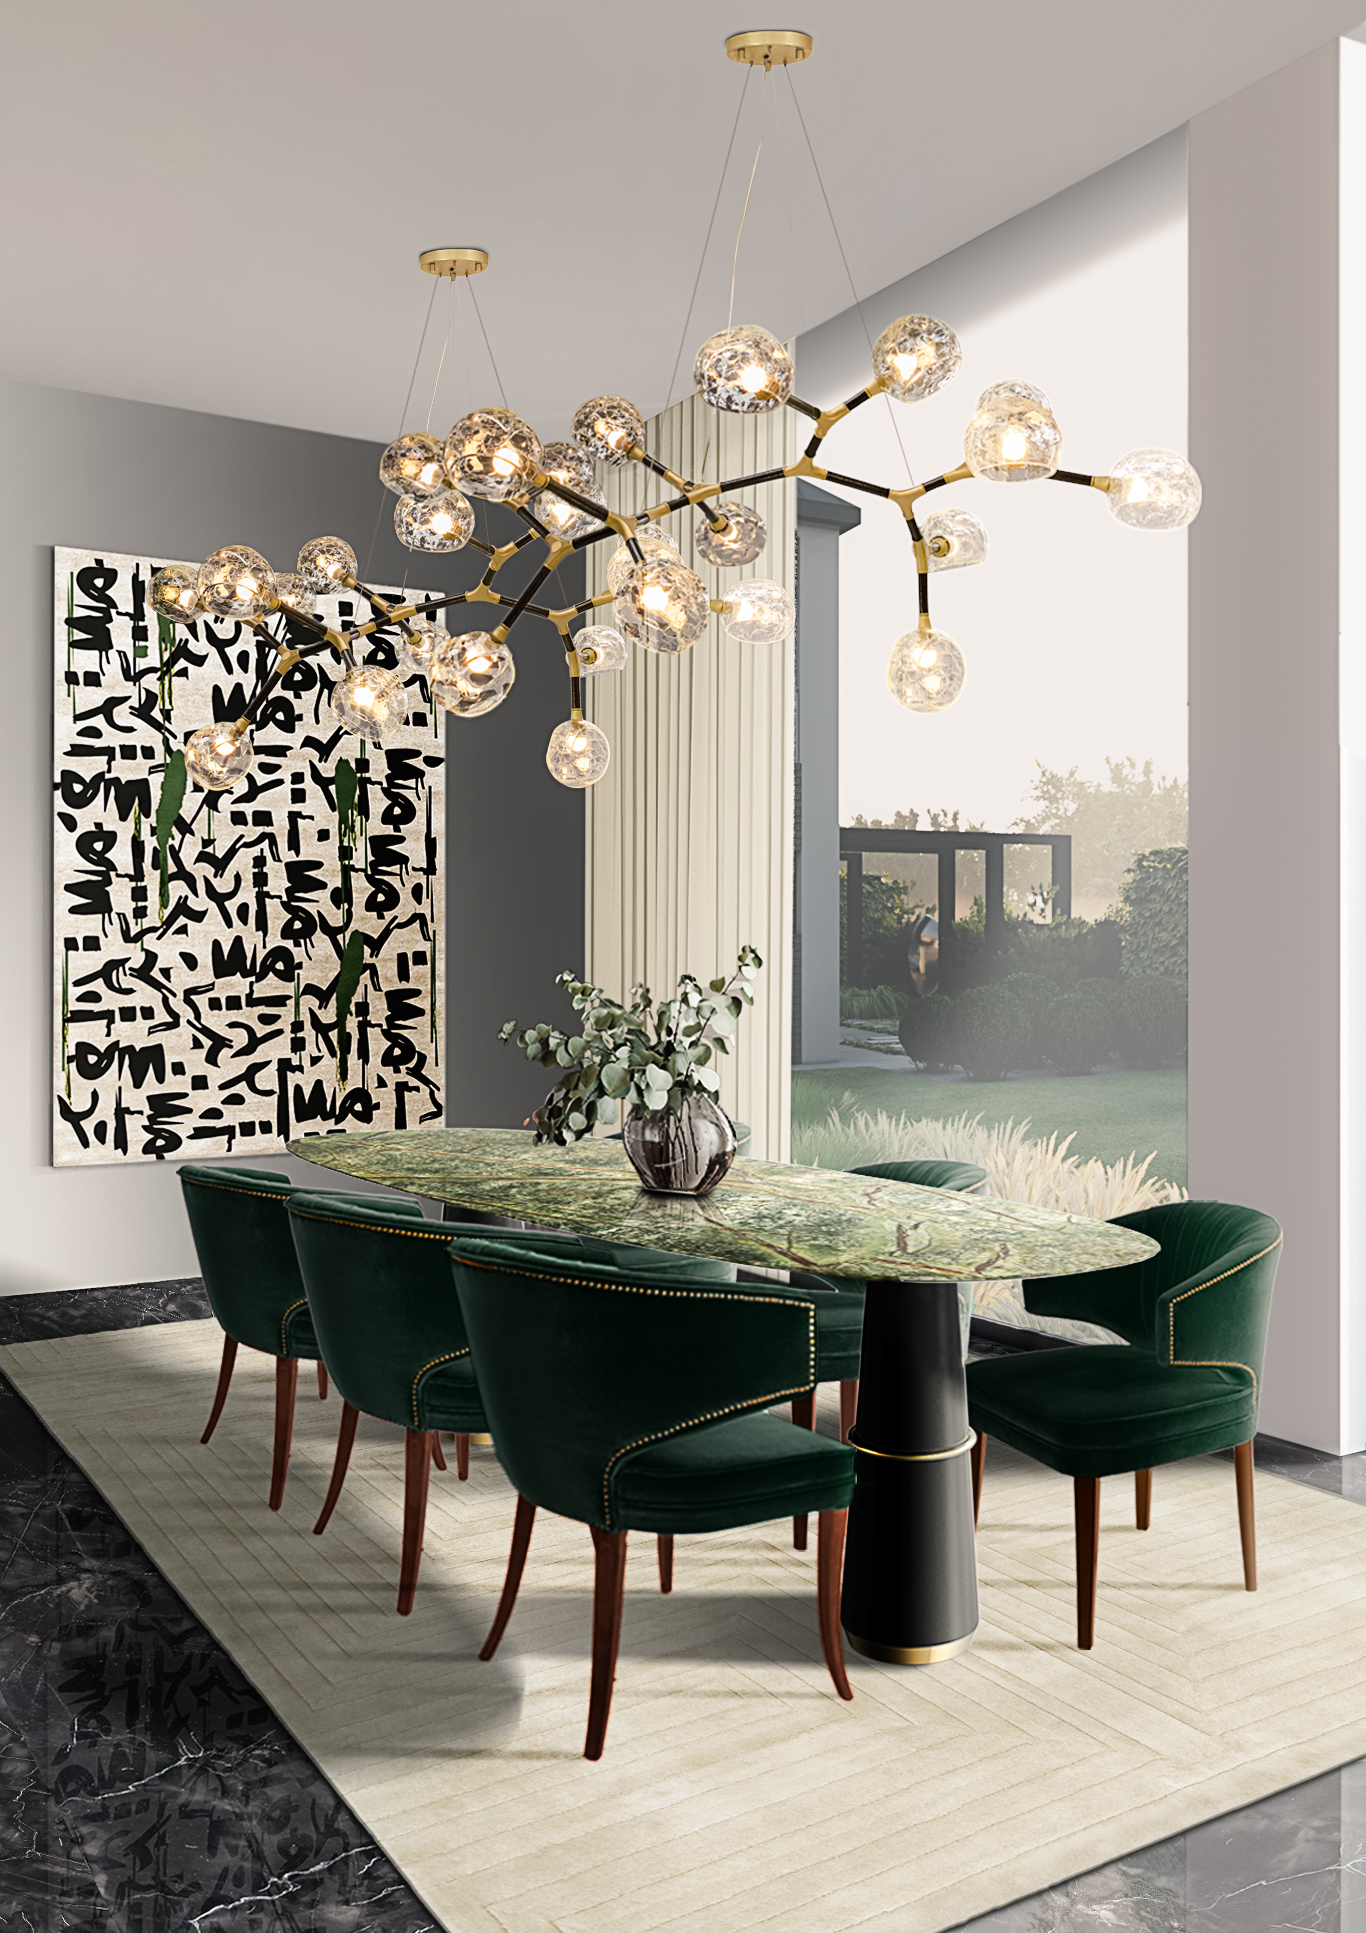 modern contemporary dining room with black and white urban rug with graffitti patterned hanging on the wall.